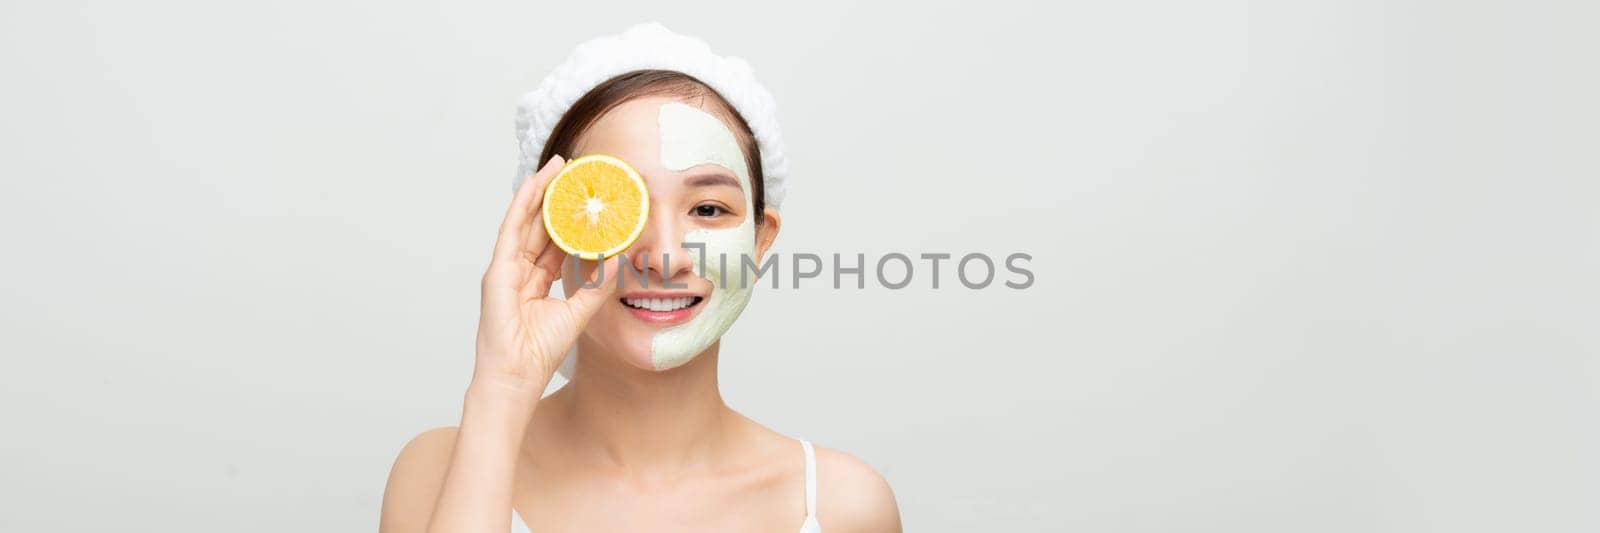 Young woman with facial clay mask holding orange fruit slice covering eyes. Banner